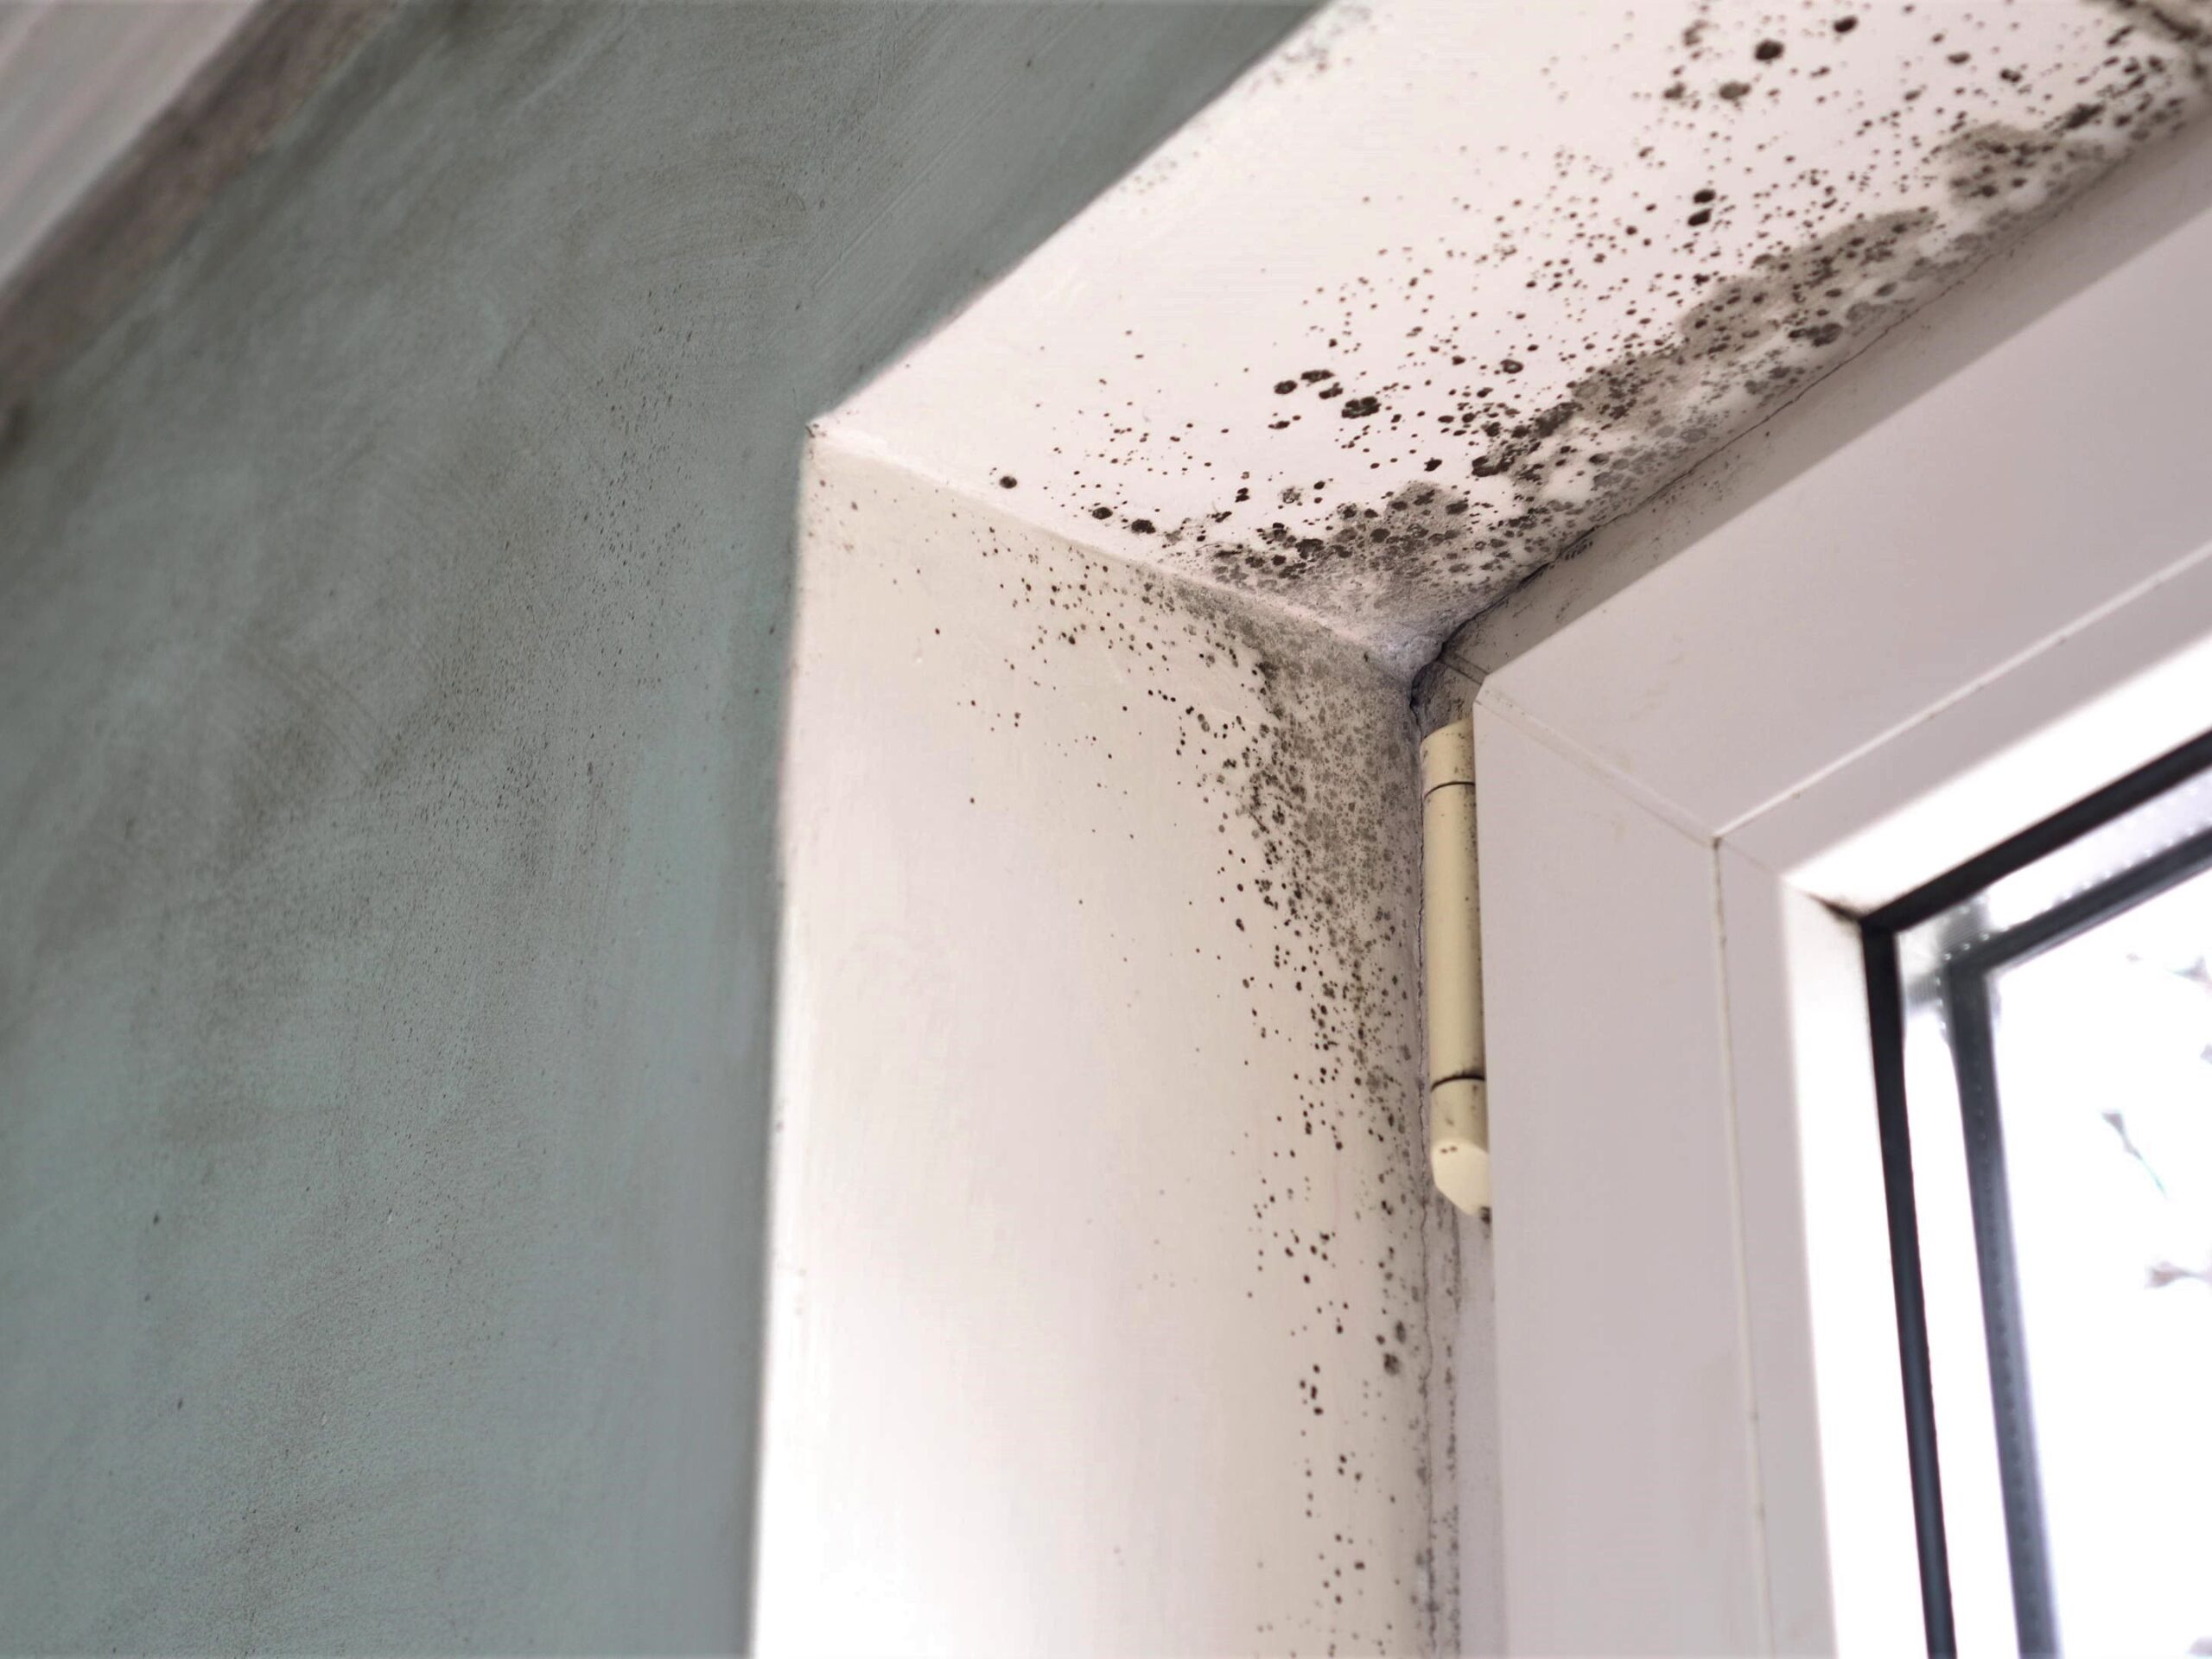 Threats of Black Mold to Architecture and Dwellers